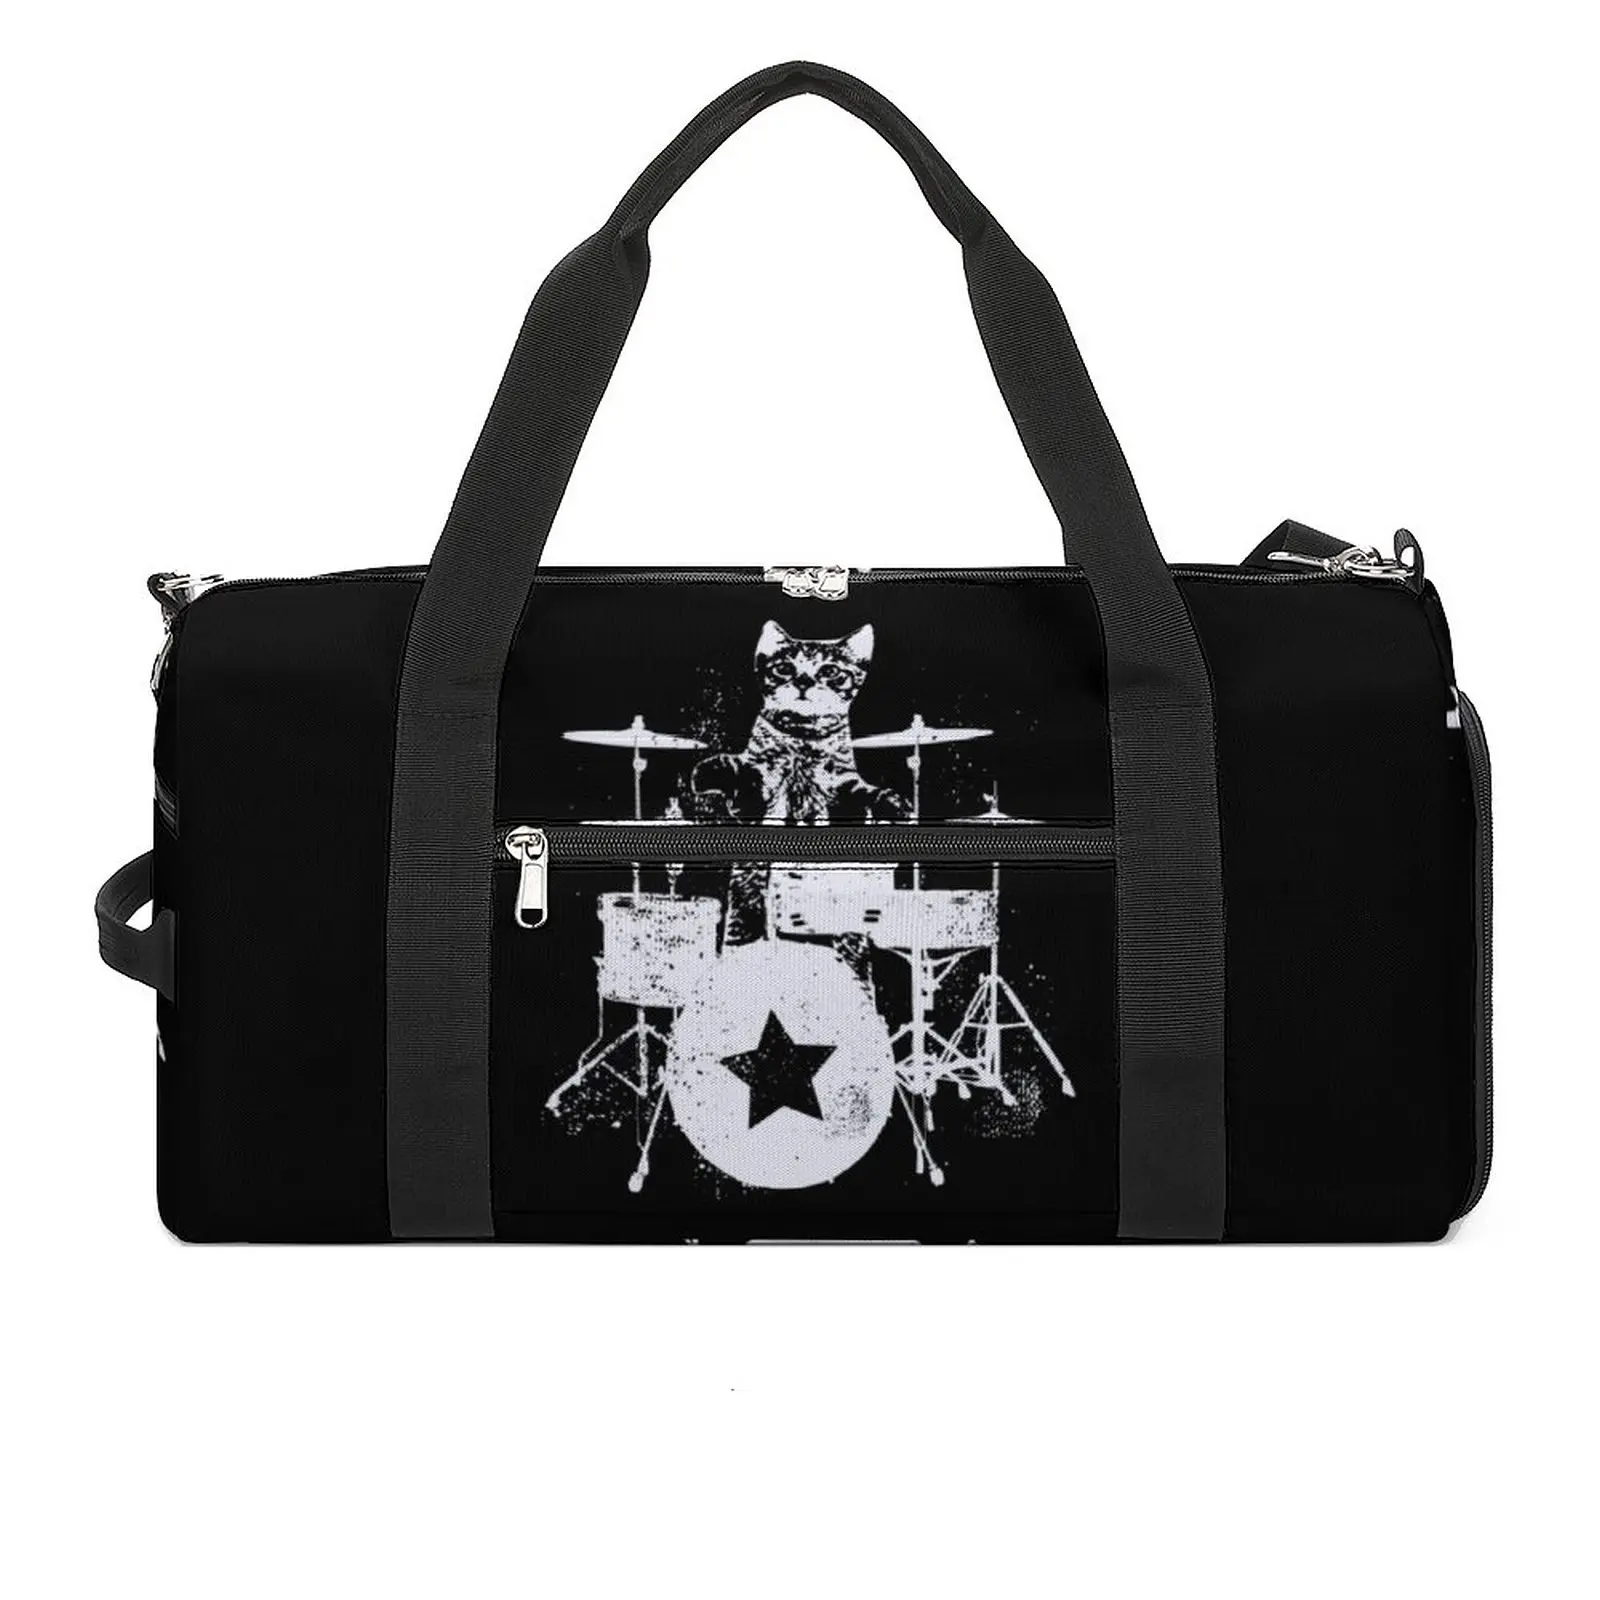 

Gym Bag The Musician Cat Playing Drums Sports Bag with Shoes Drummer Cat Men Portable Print Handbag Graphic Swimming Fitness Bag